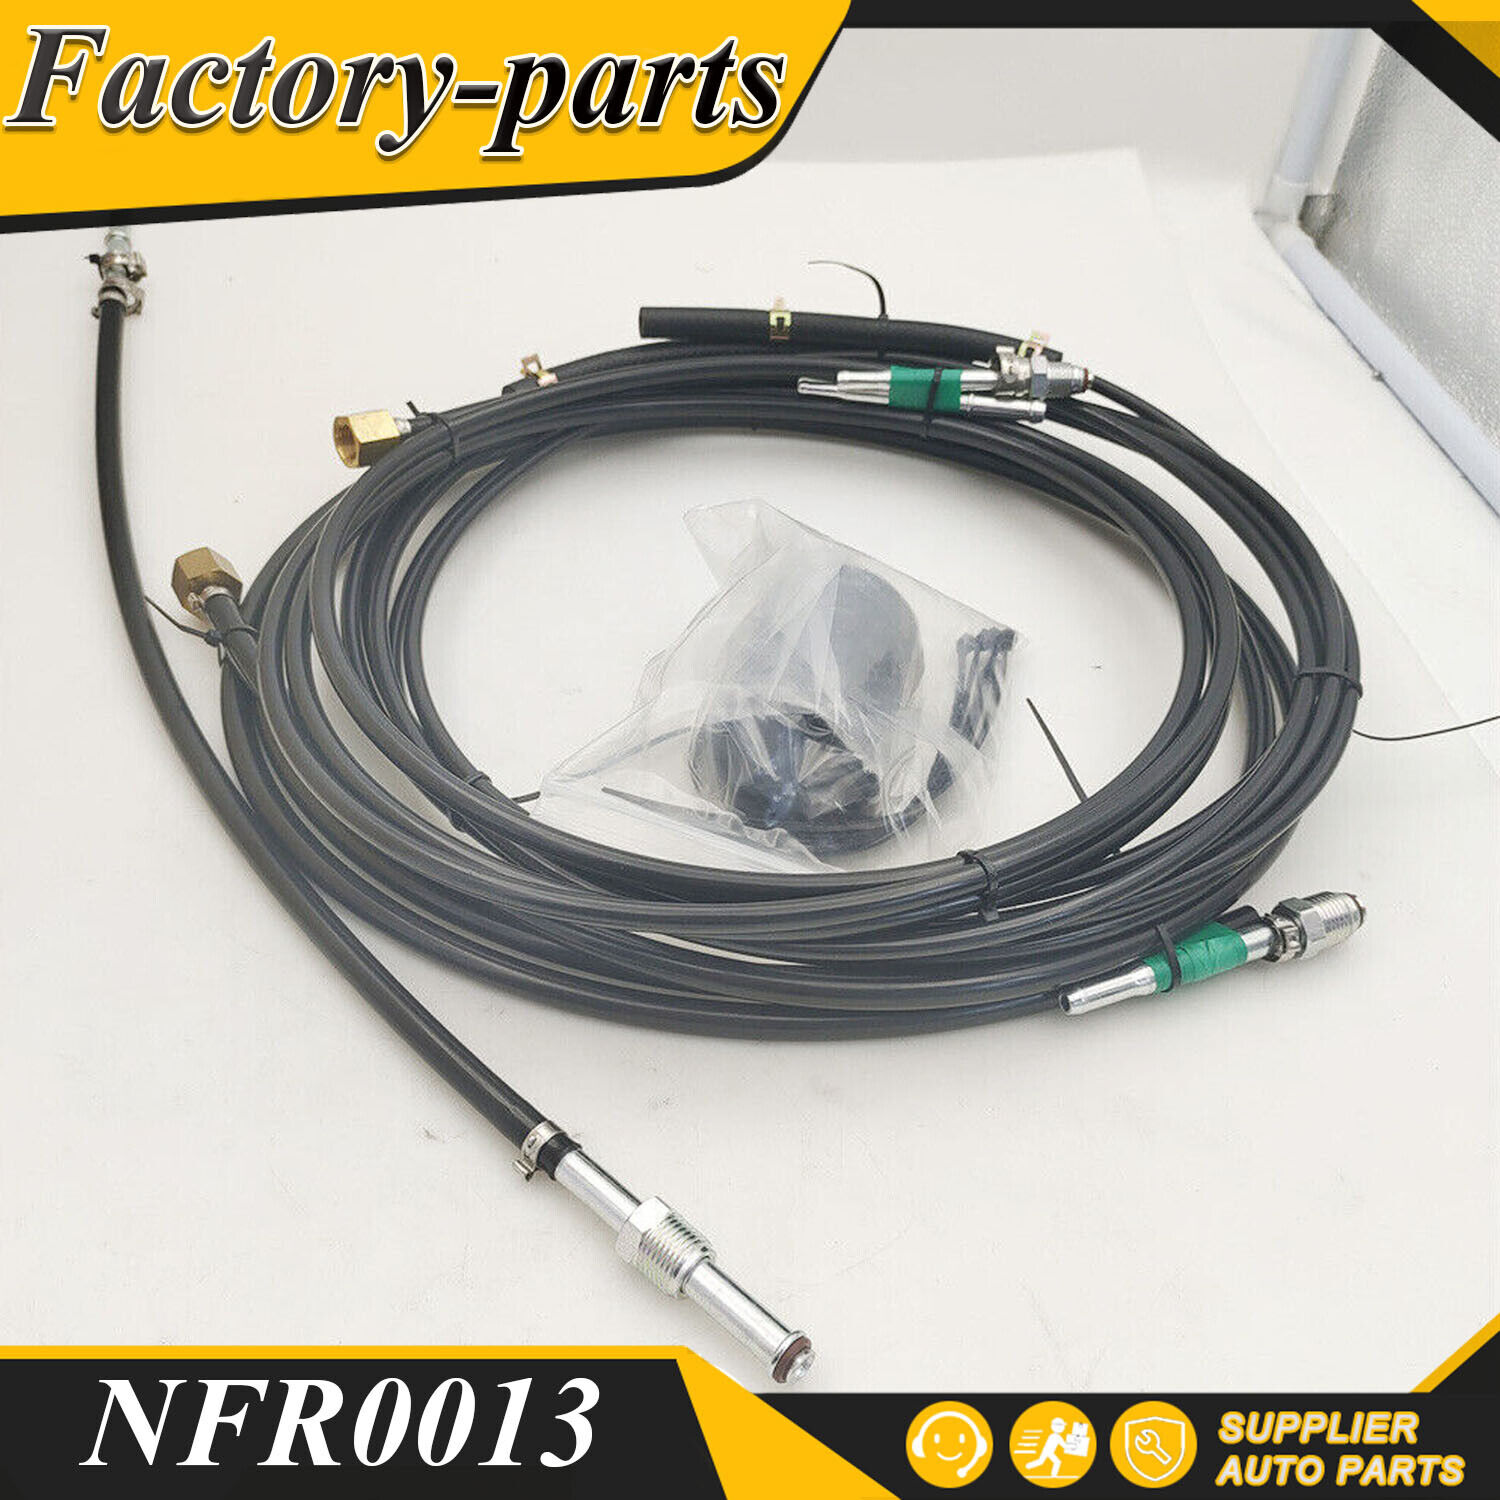 Complete Nylon Fuel Line Replacement Kit for 1988-1997 Chevrolet Gmc Gas Trucks